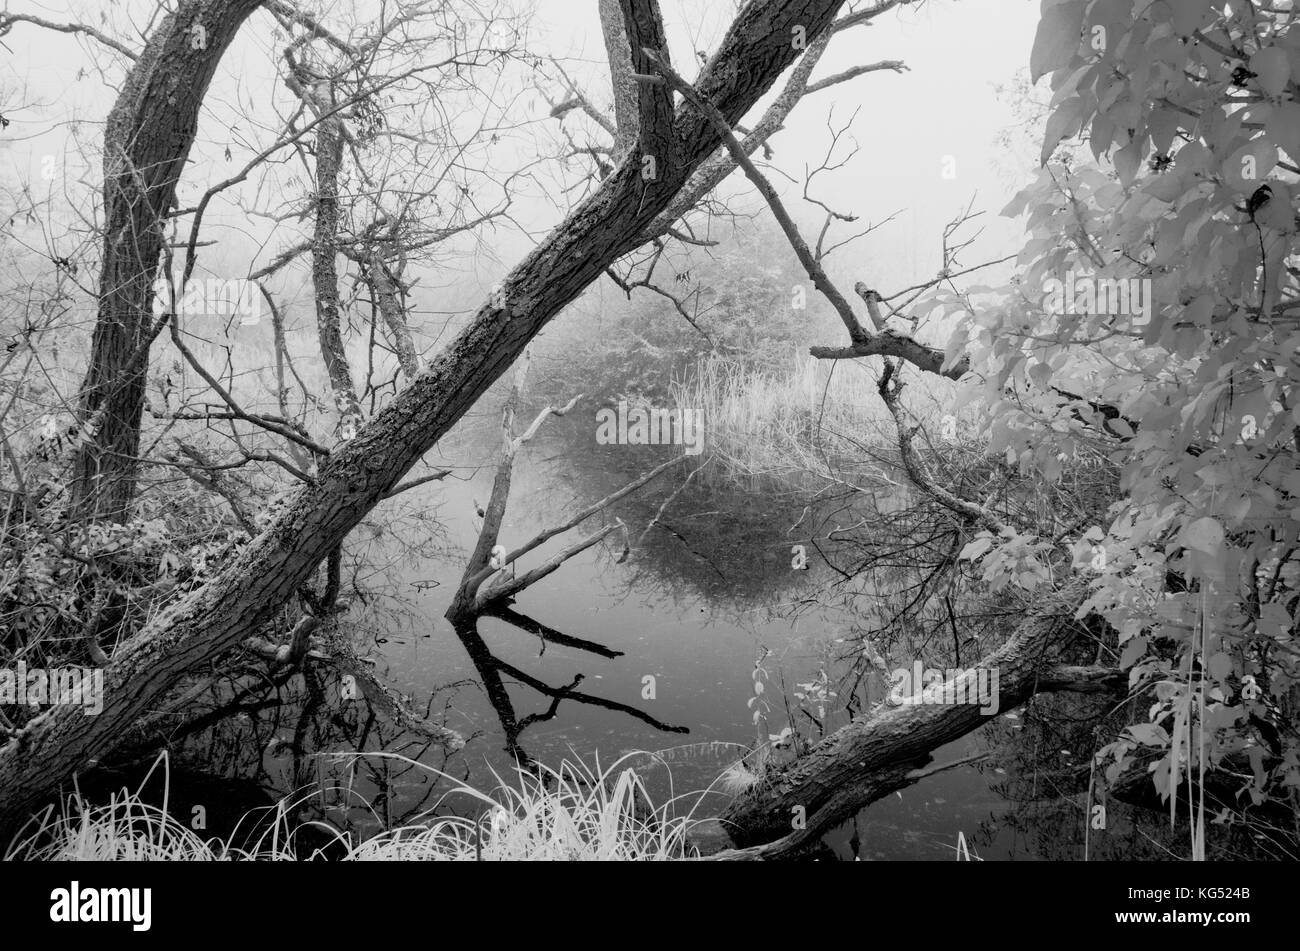 Fallen trees and dead branches in water, black and white Stock Photo